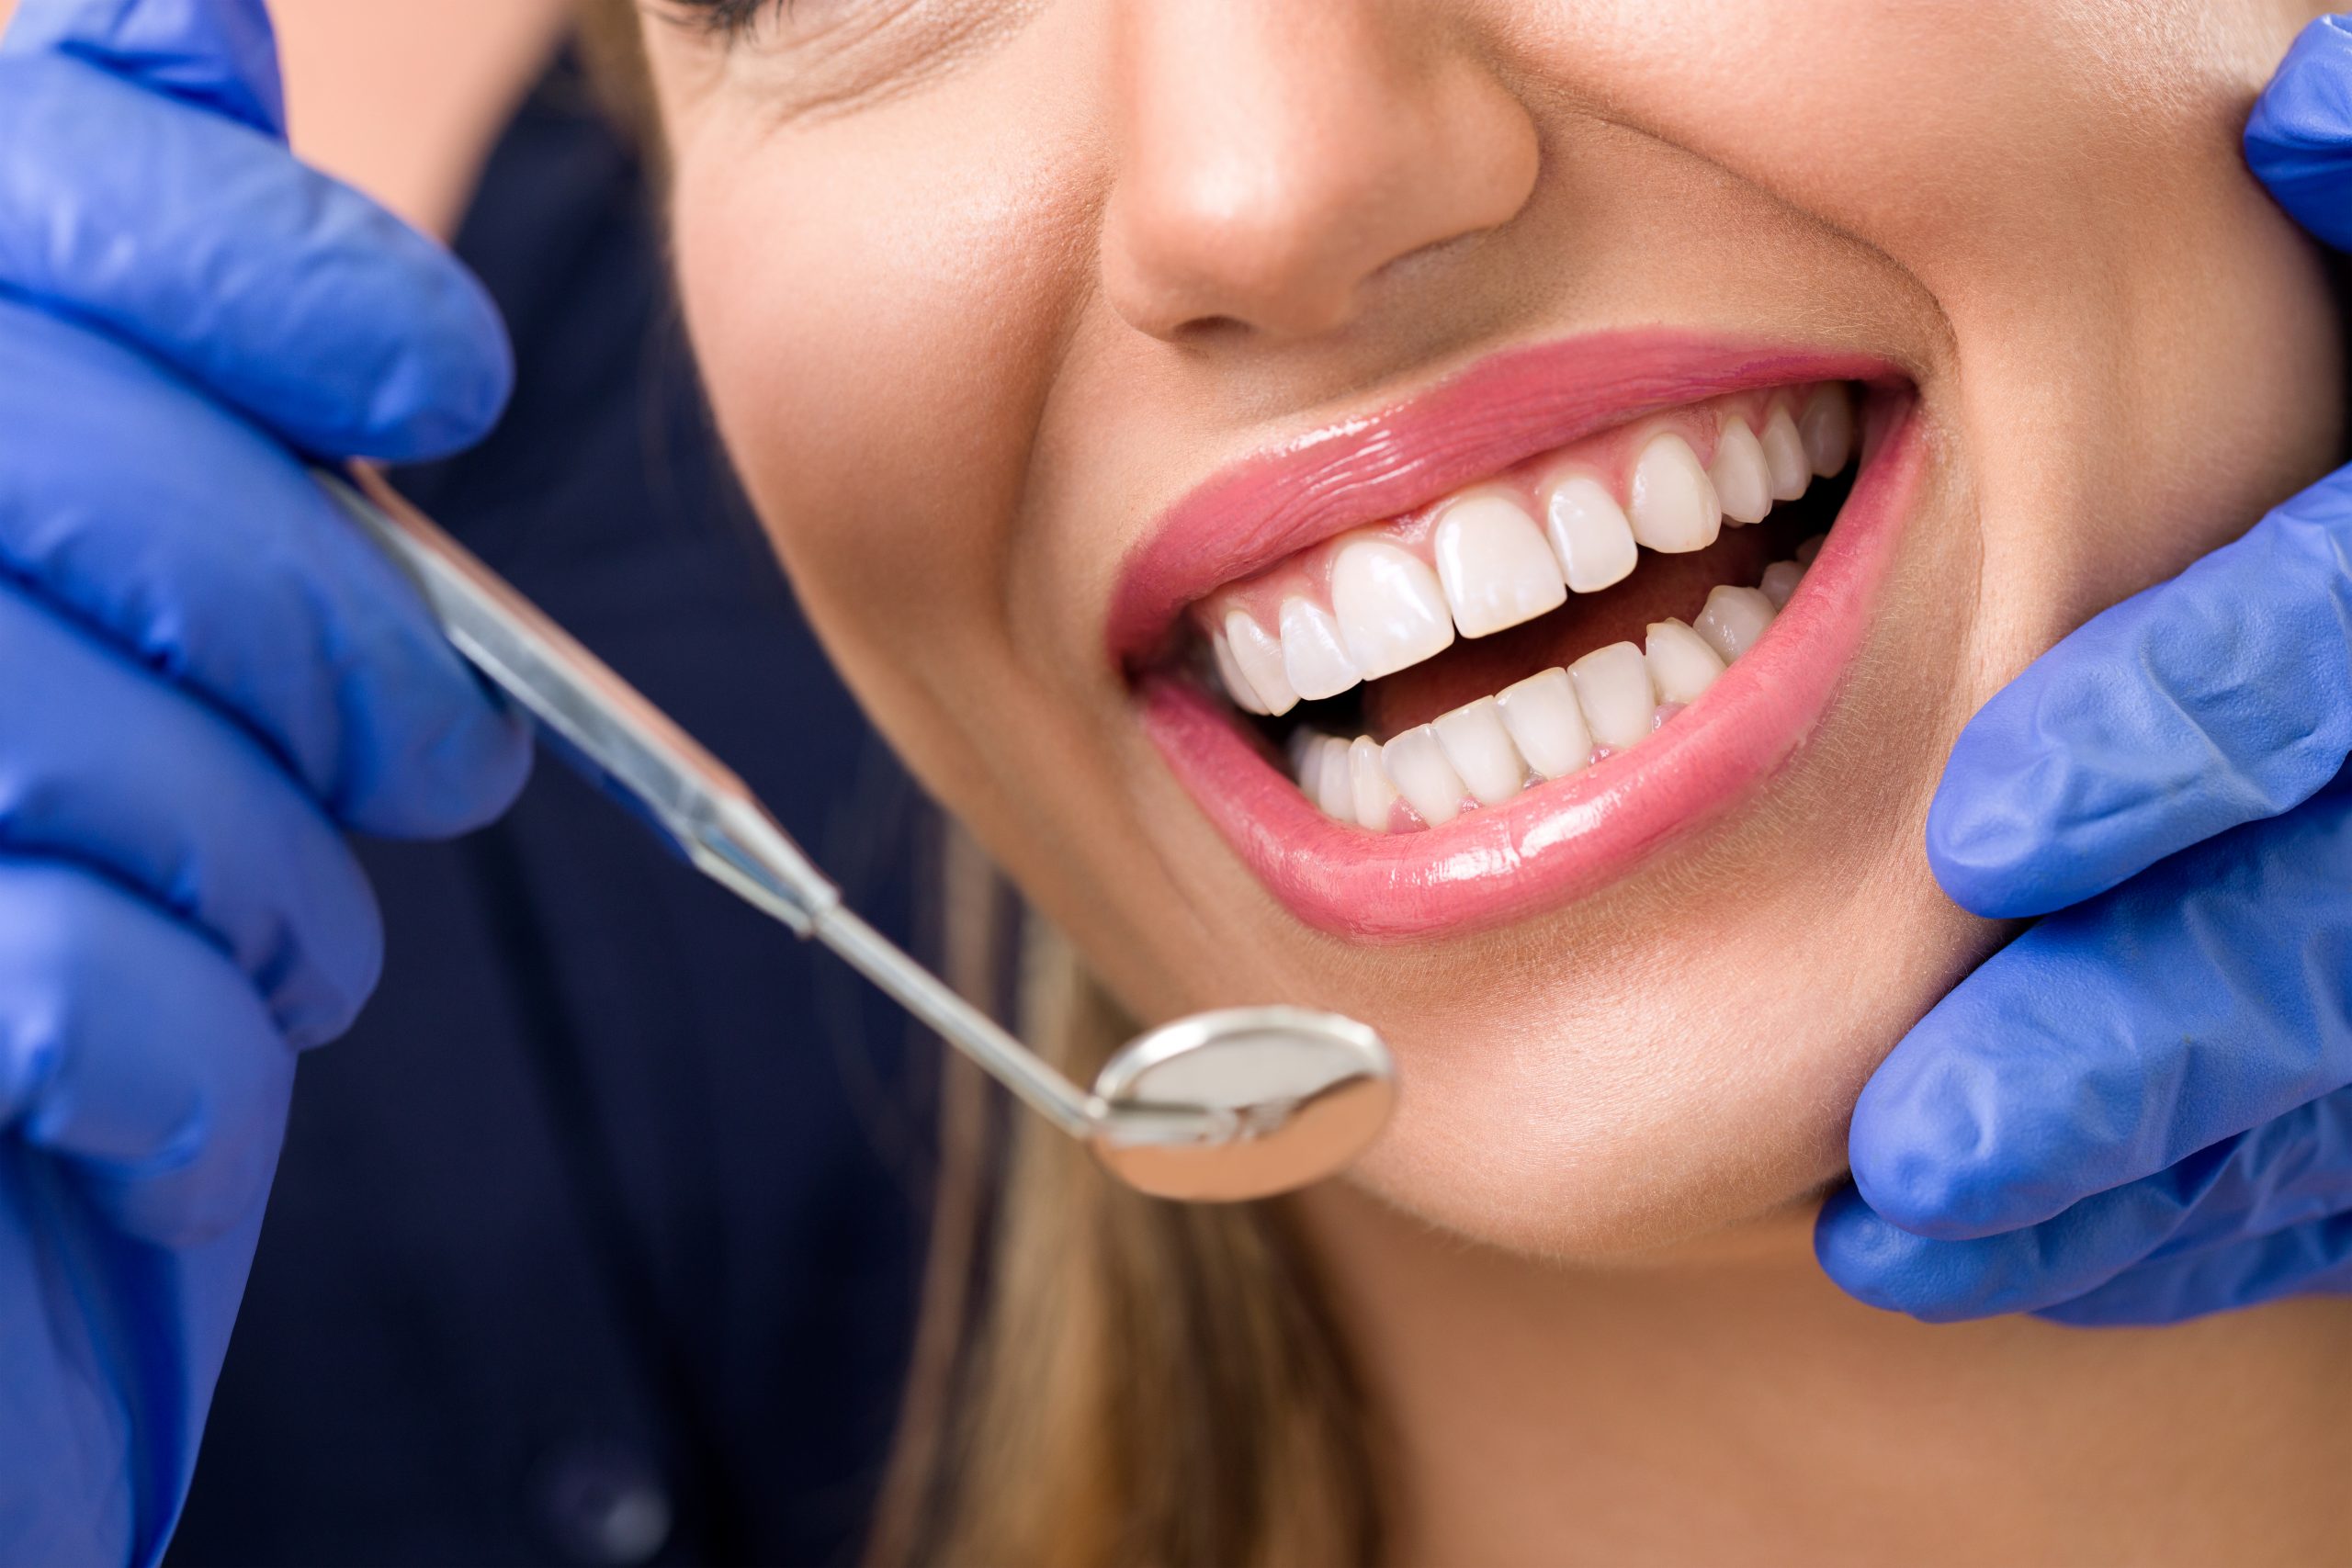 people across the UK looking to improve smile with cosmetic dentistry